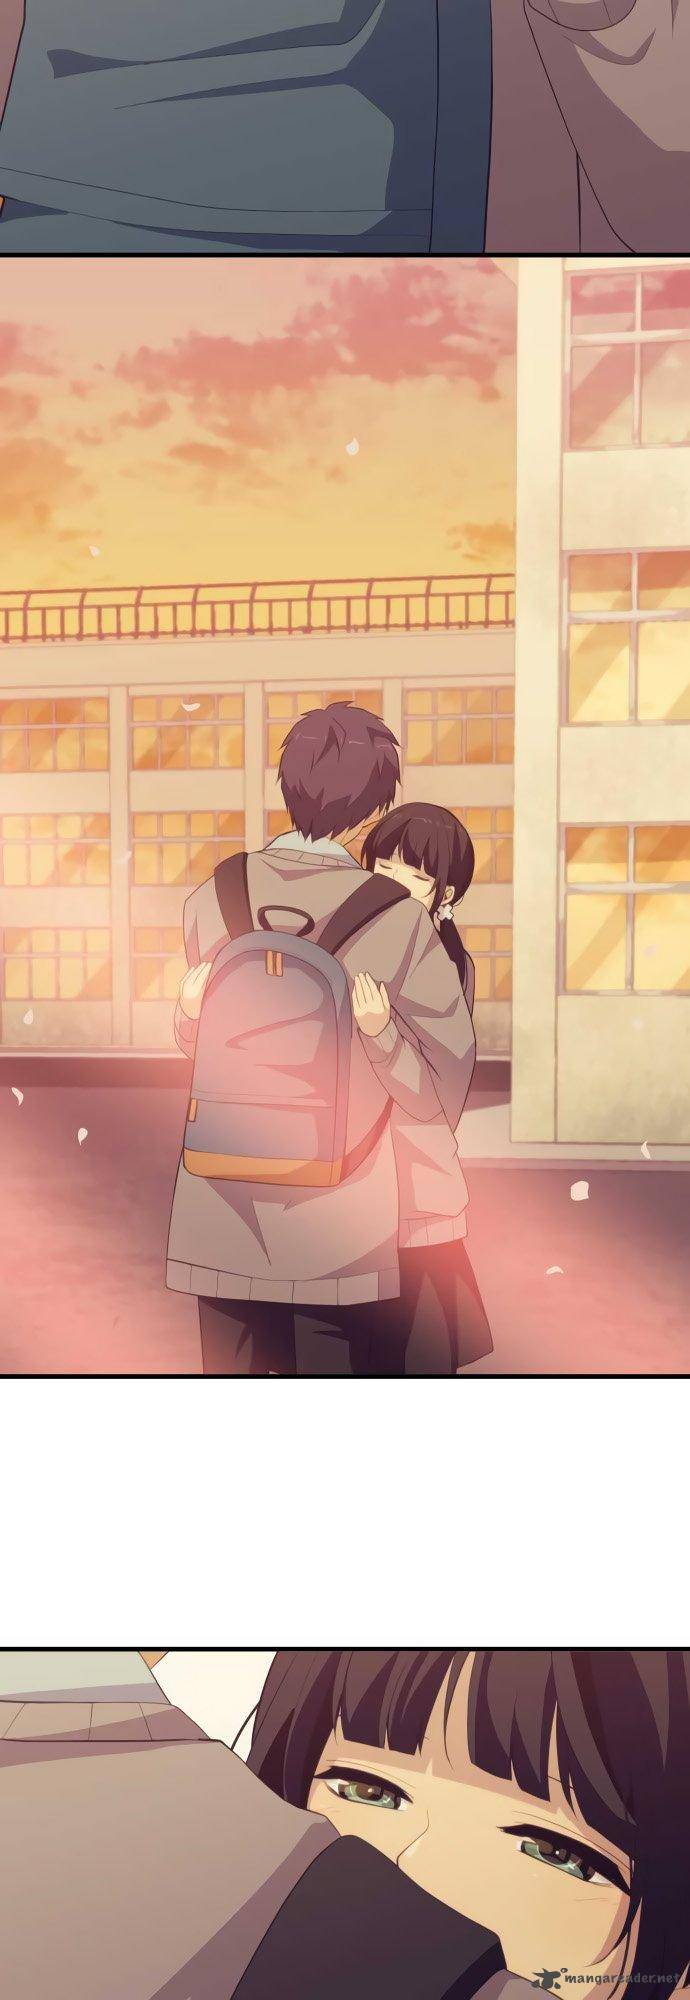 Relife 213 6